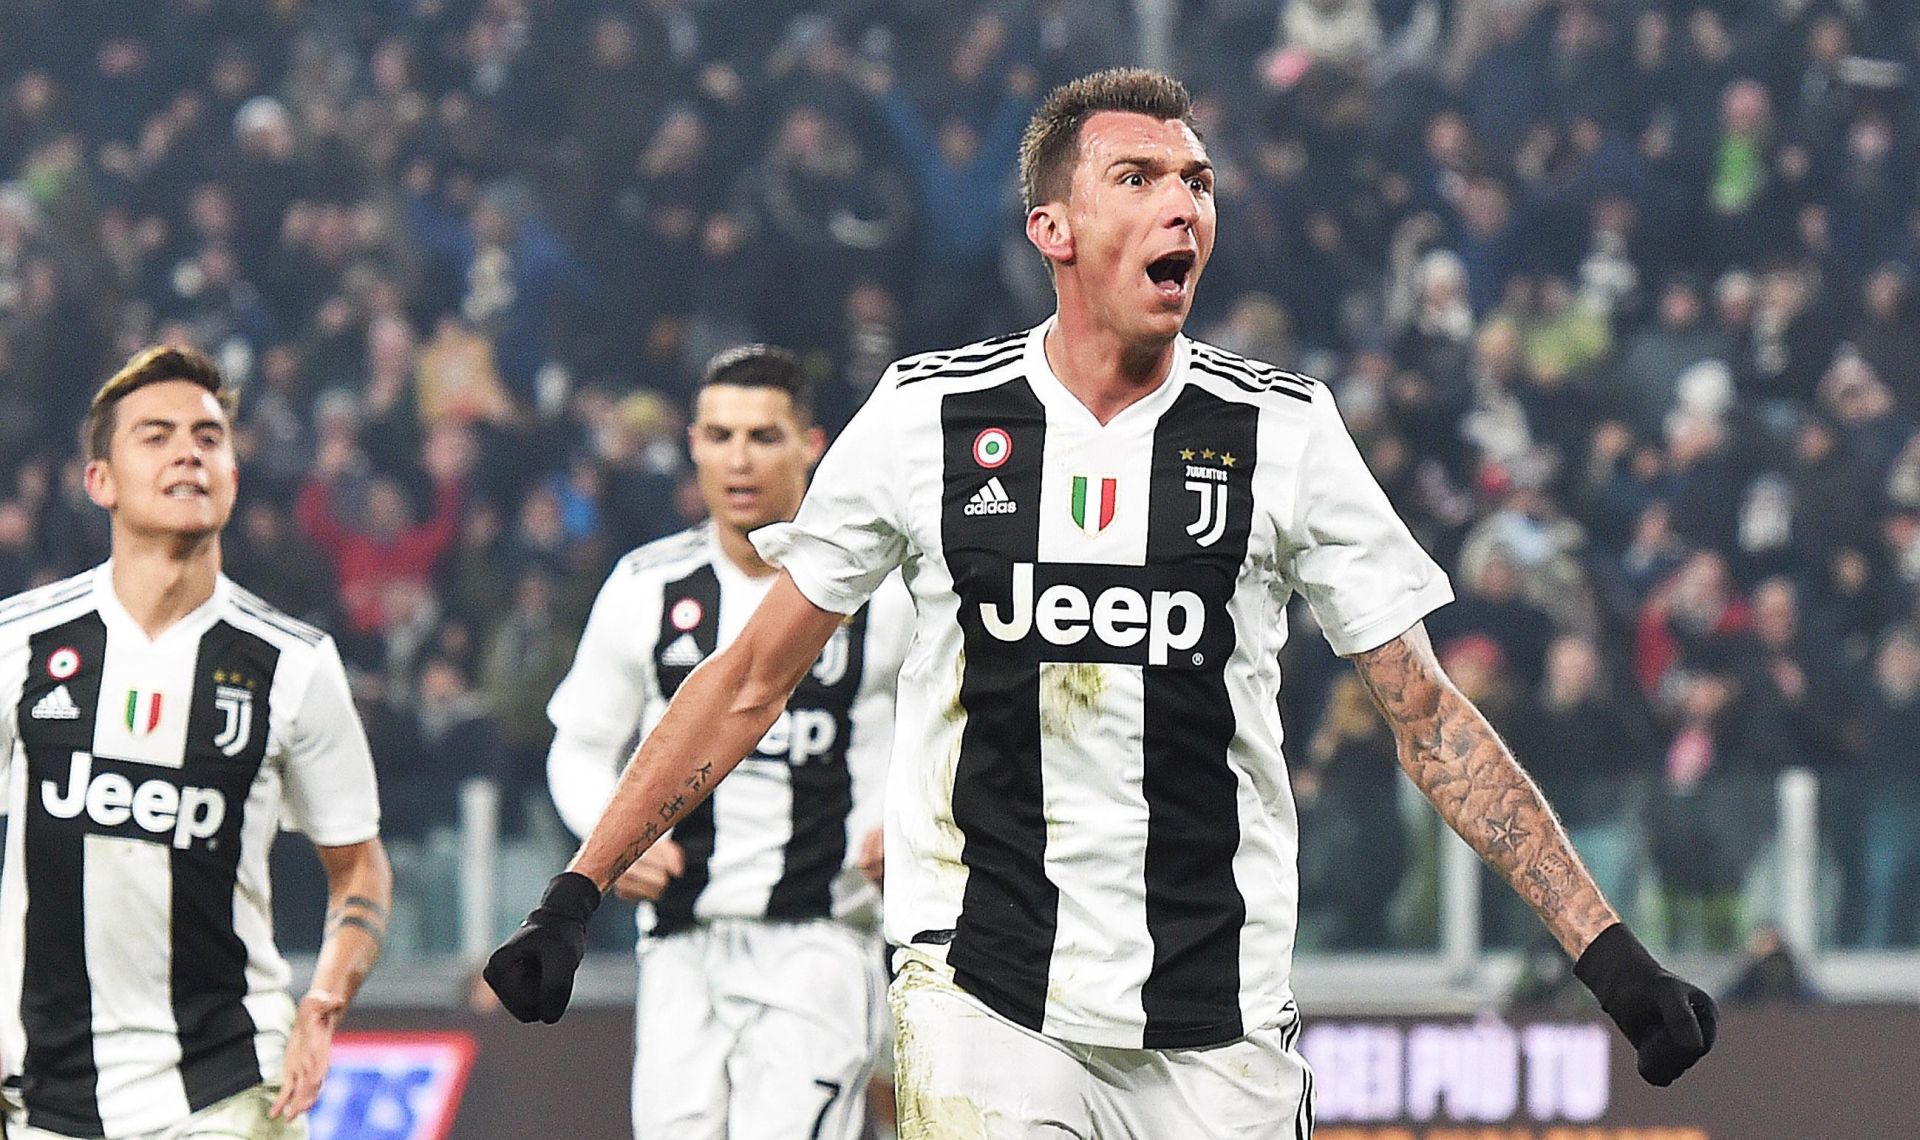 epa07215656 Juventus's Mario Mandzukic jubilates after scoring the 1-0 during the italian Serie A soccer match Juventus FC vs Inter FC at the Allianz stadium in Turin, Italy, 7 December 2018.  EPA/ANDREA DI MARCO